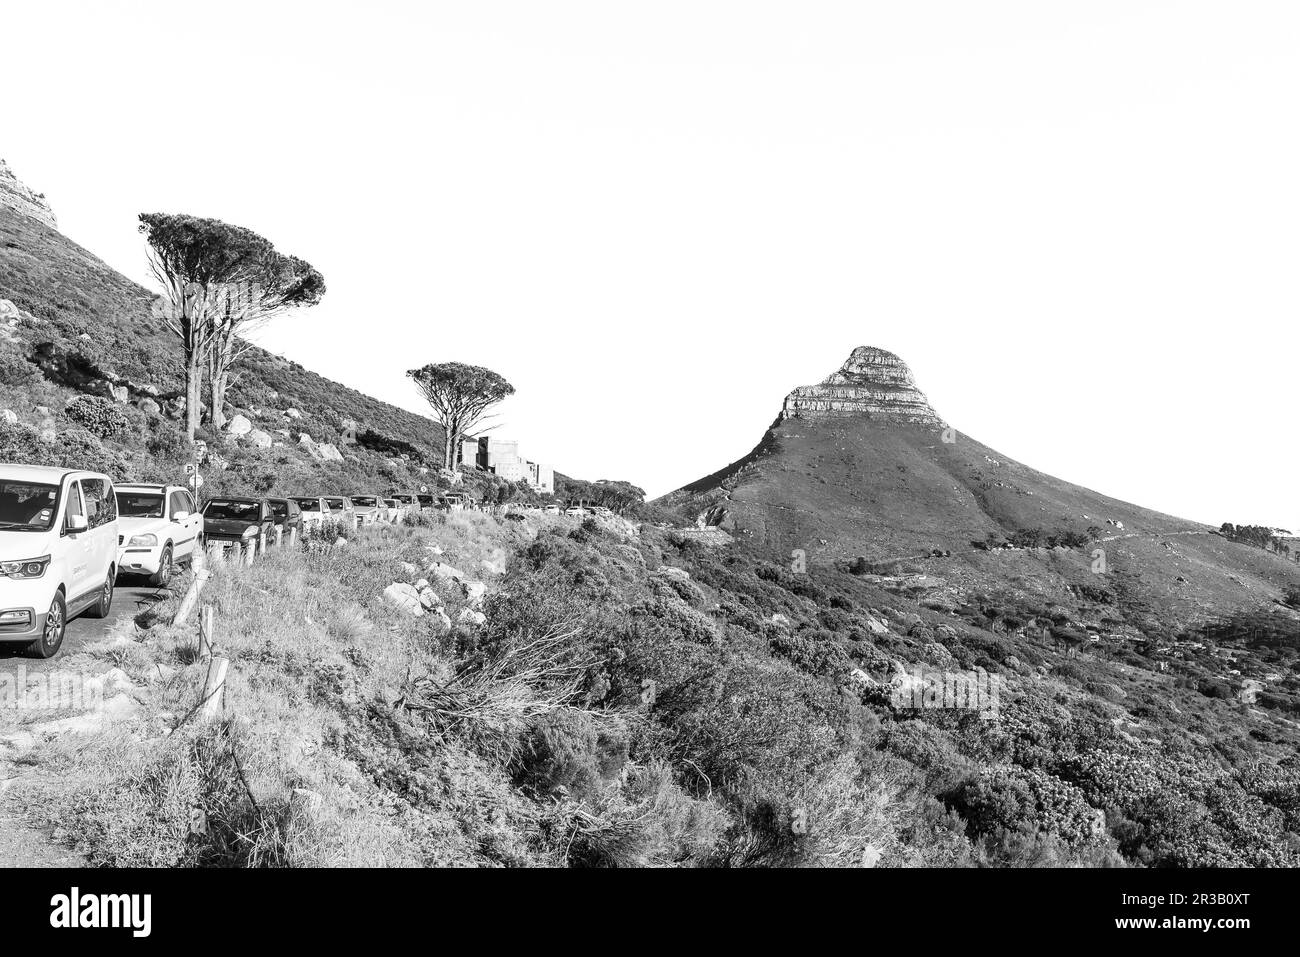 Cape Town, South Africa - Sep 14, 2022: Lions Head, the lower cable station and parked cars on the slope of Table Mountain in Cape Town. Monochrome Stock Photo